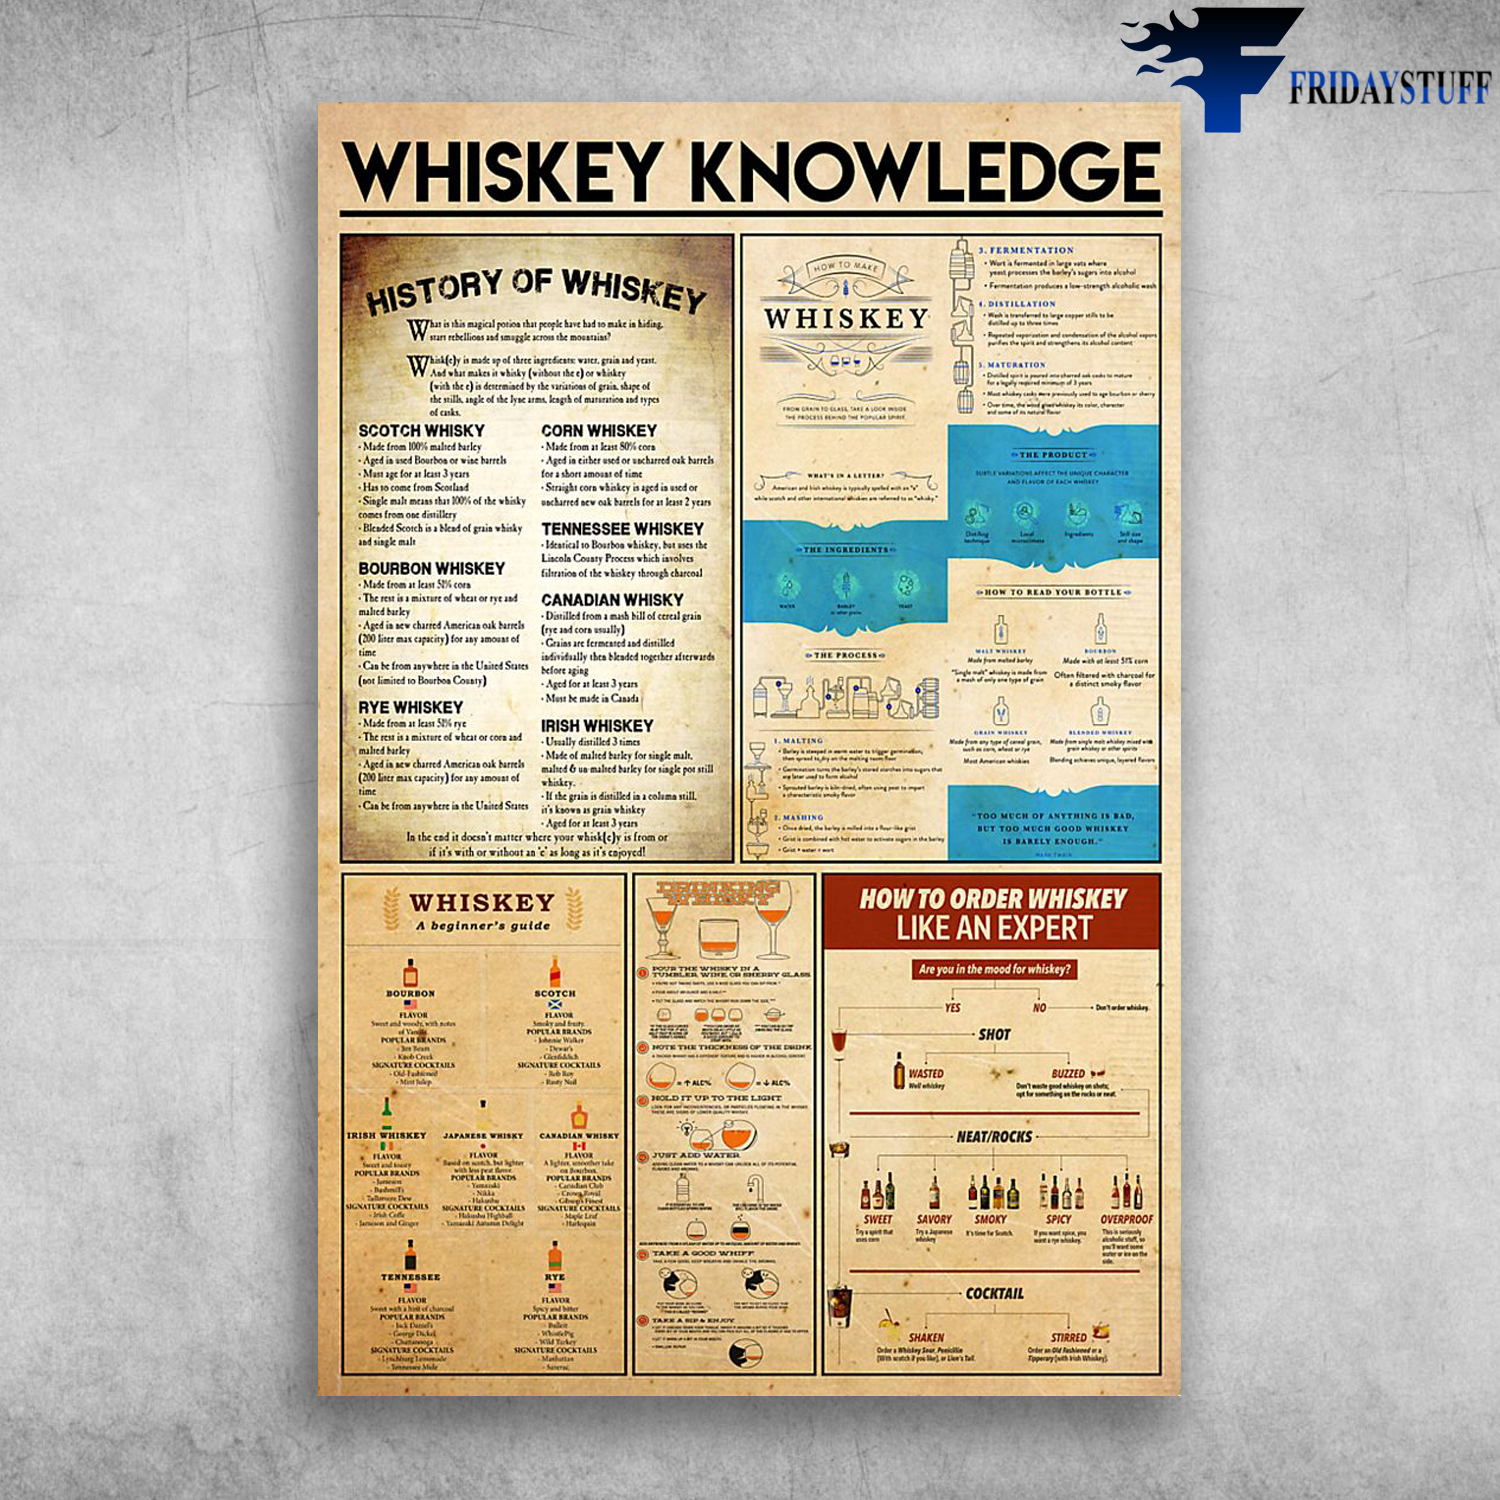 Whiskey Knwoledge How To Order Whiskey Like An Expert